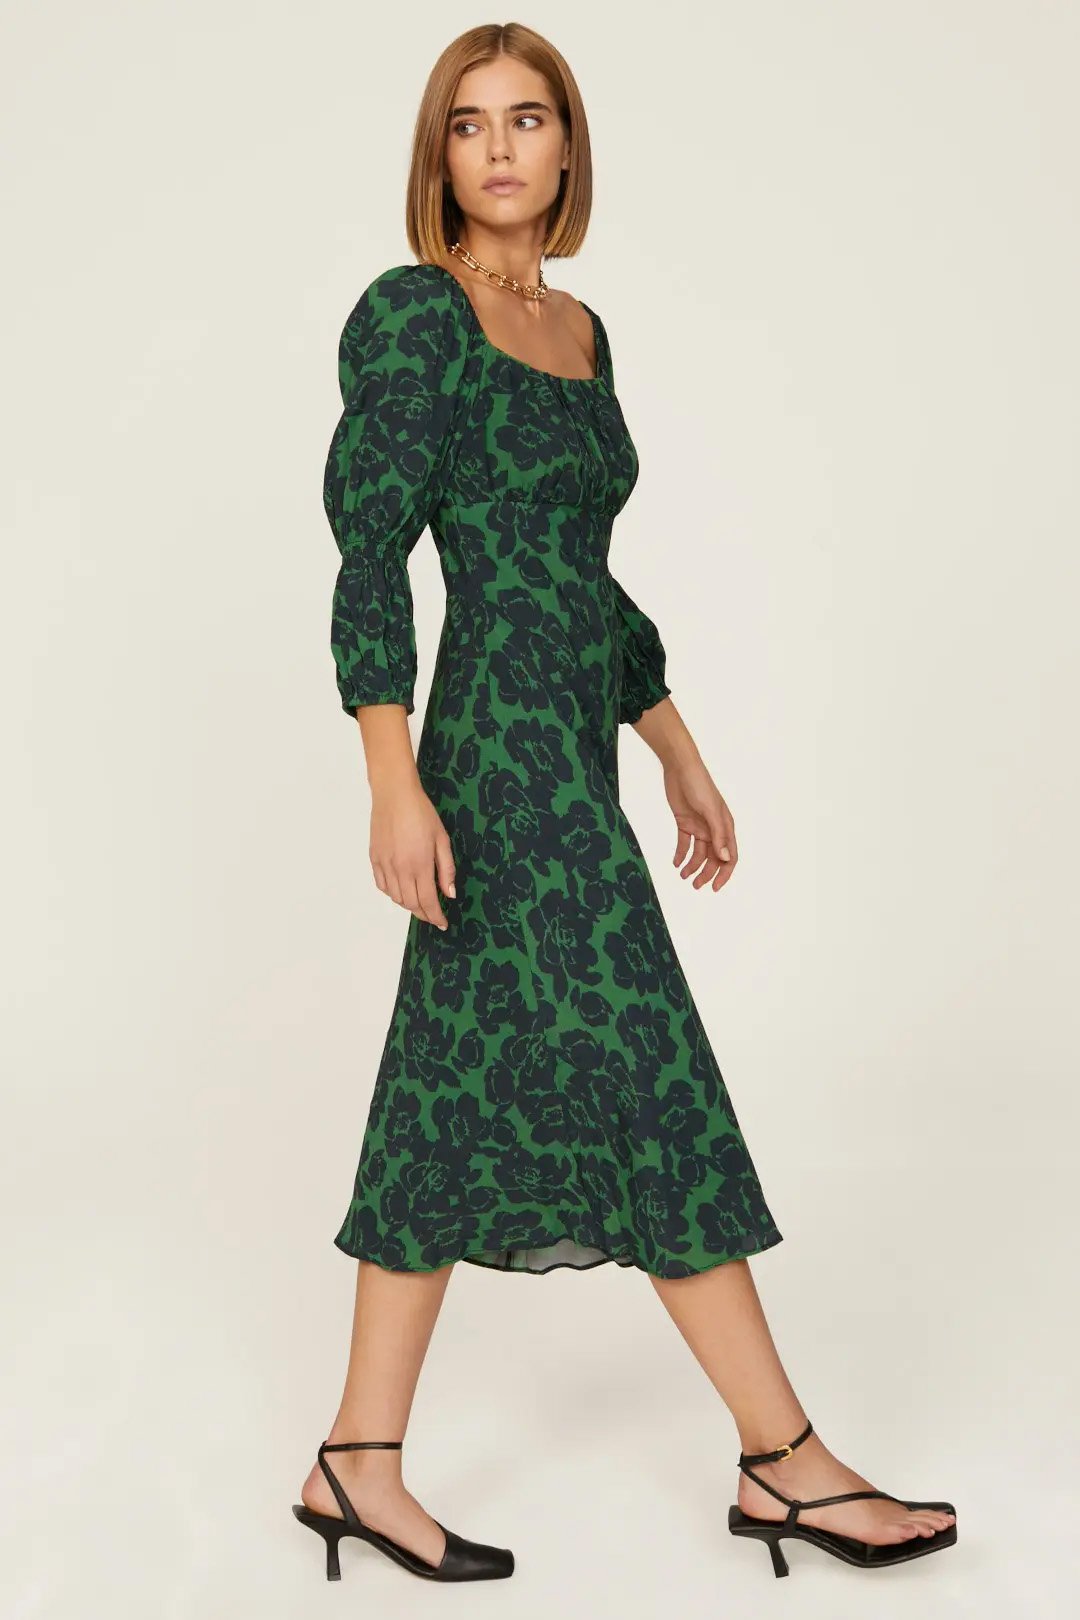 floral scoop dress peter som fall 22 rent the runway